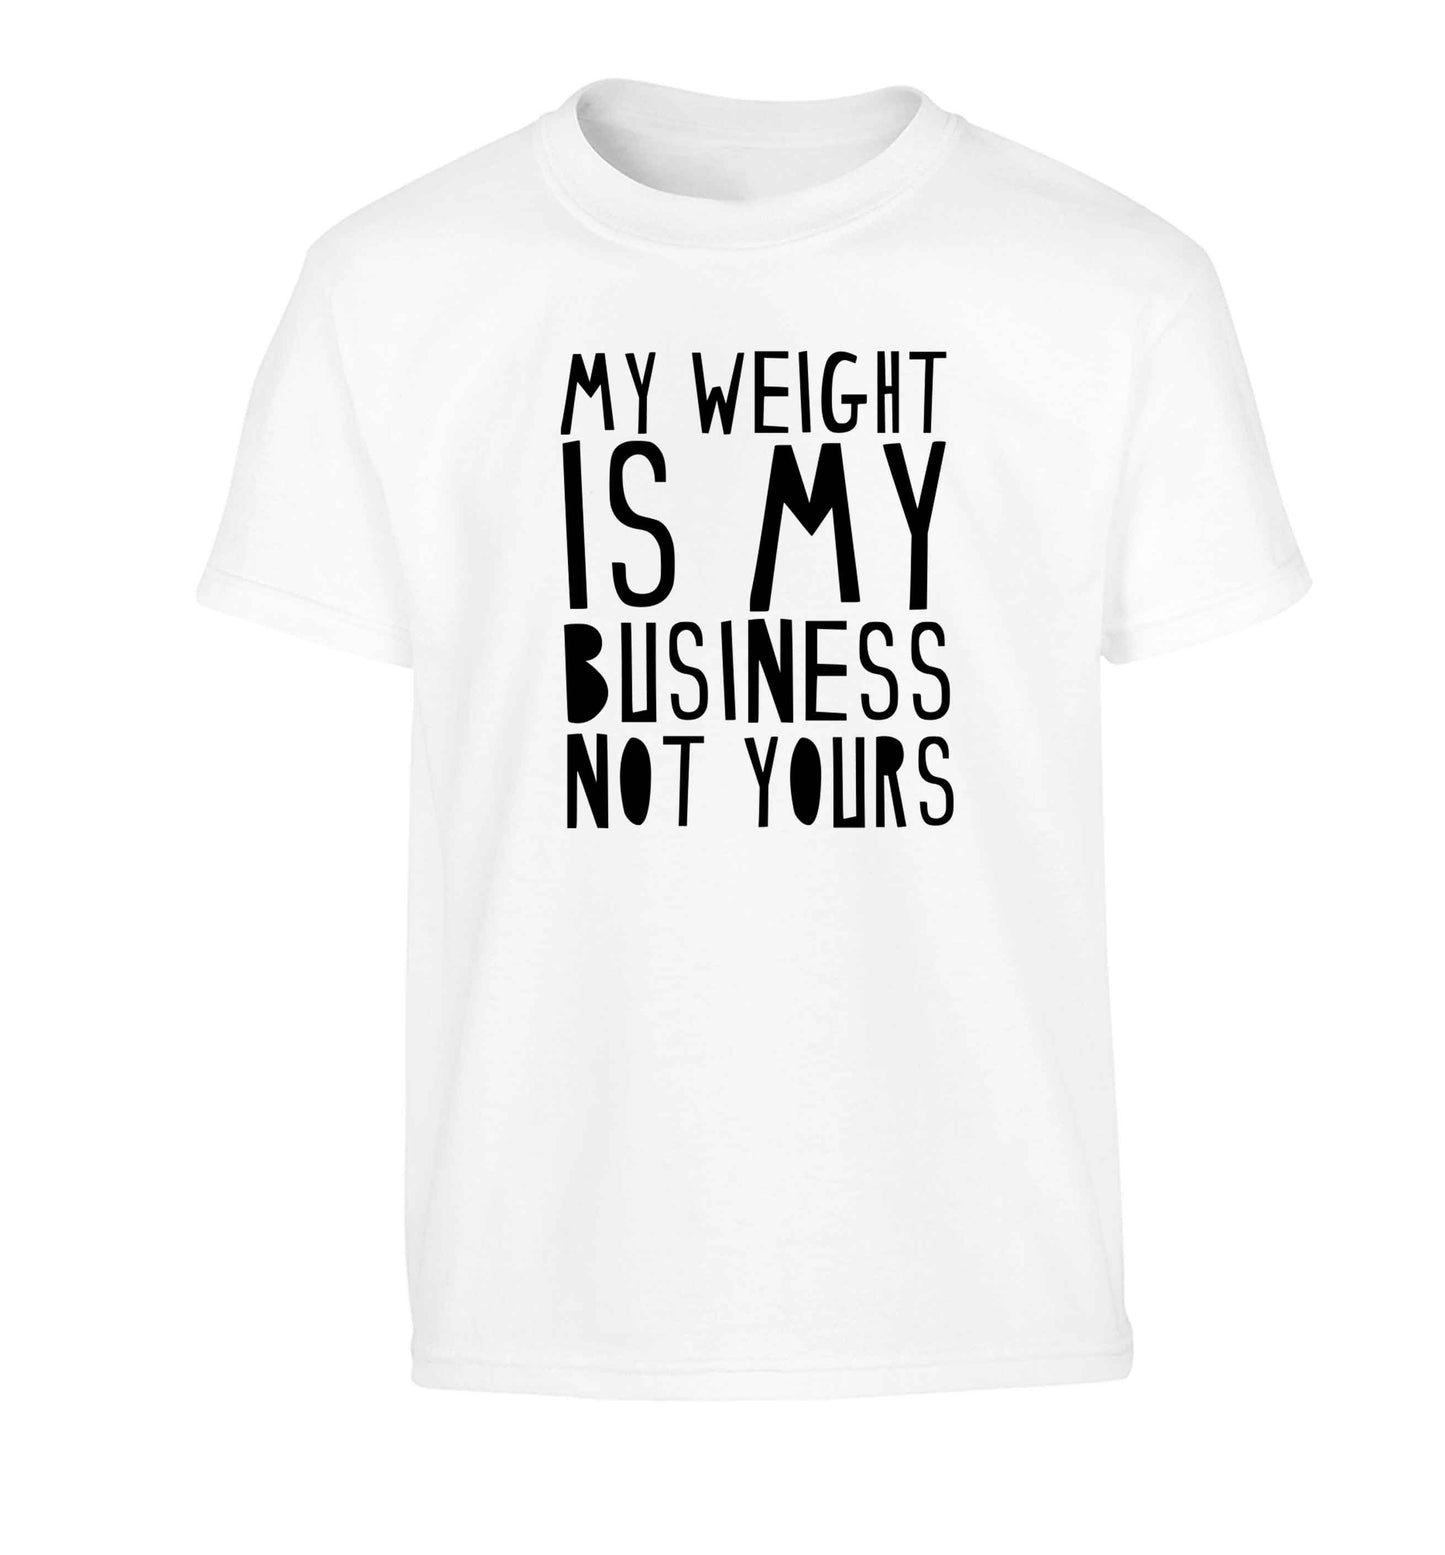 My weight is my business not yours Children's white Tshirt 12-13 Years